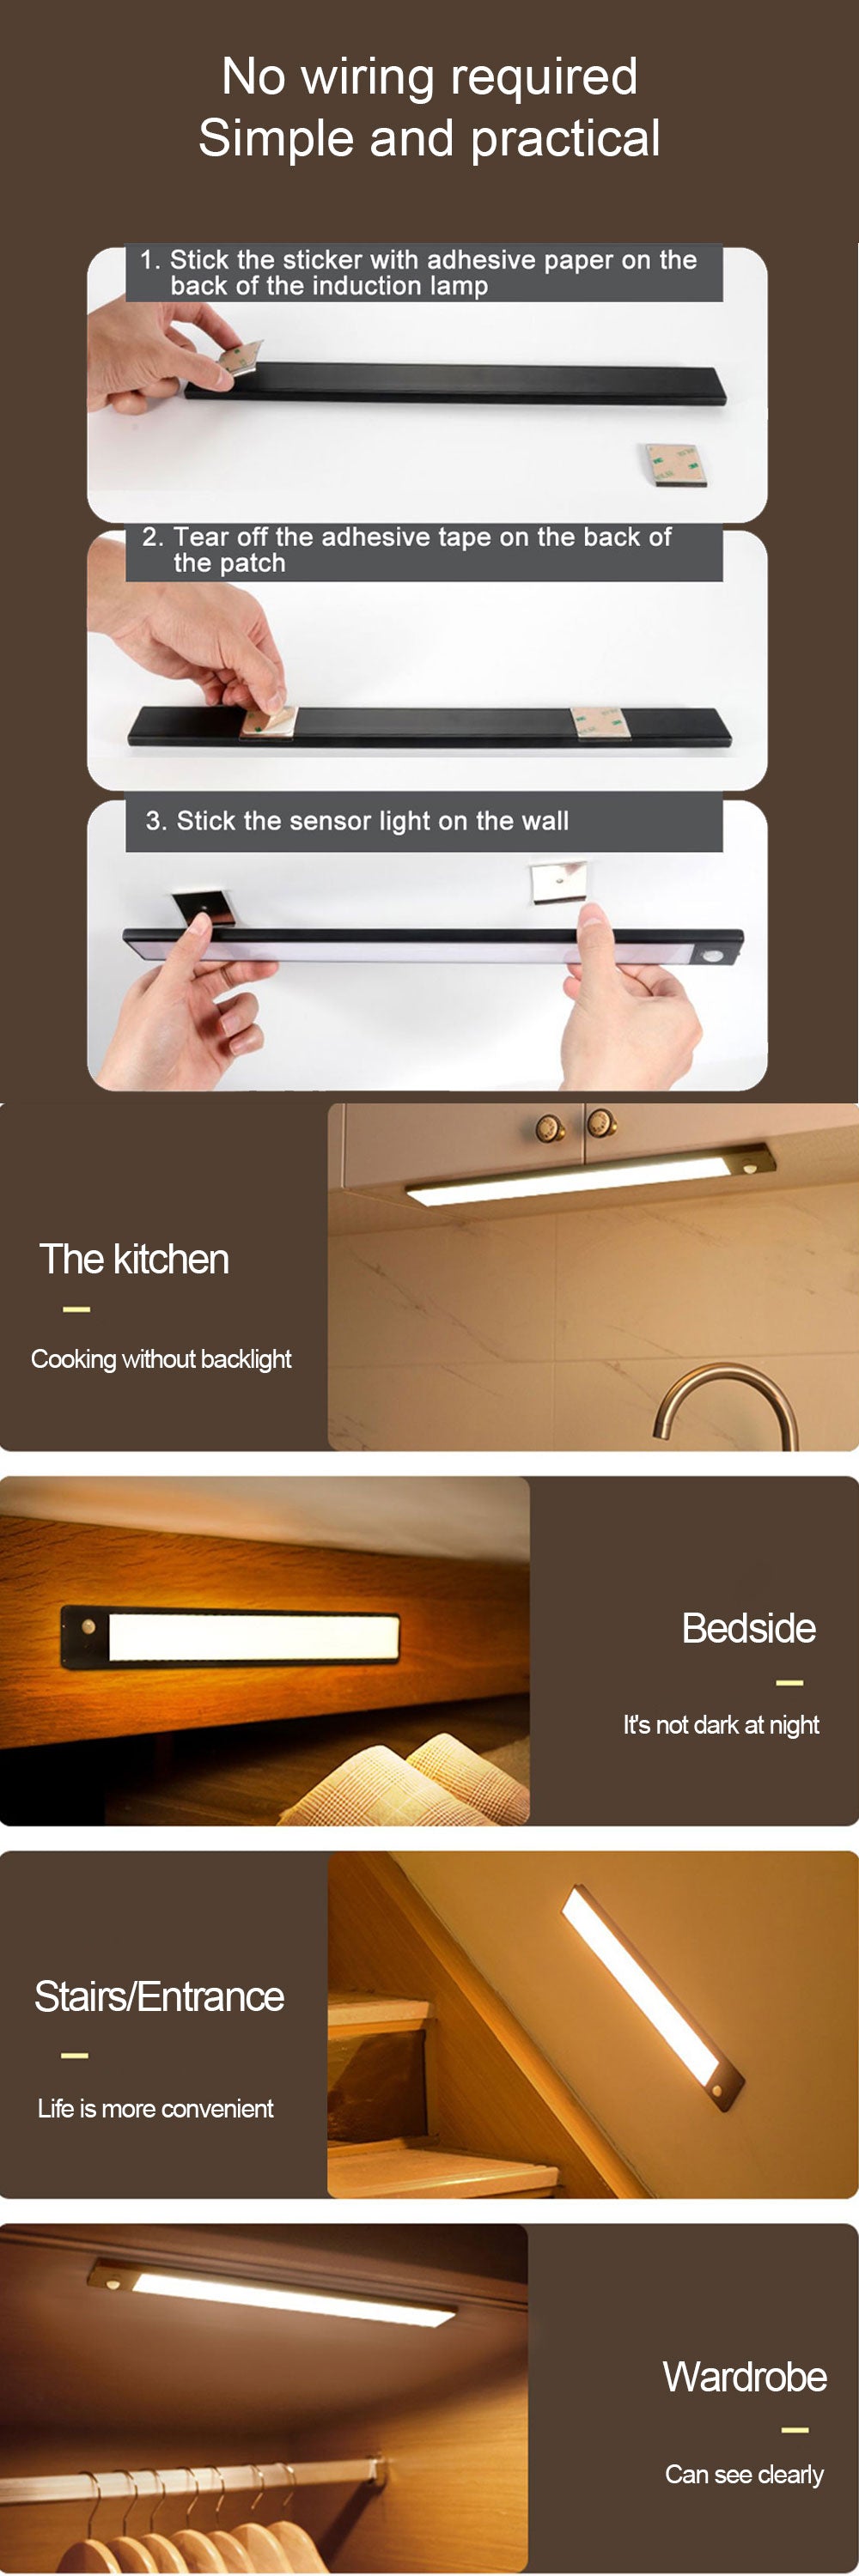 LED Motion Sensor Cabinet Light,Under Counter Closet Lighting, Wireless USB Rechargeable Kitchen Night Lights,Battery Powered Operated Light,54-LED Light for Wardrobe,Closets,Cabinet,Cupboard